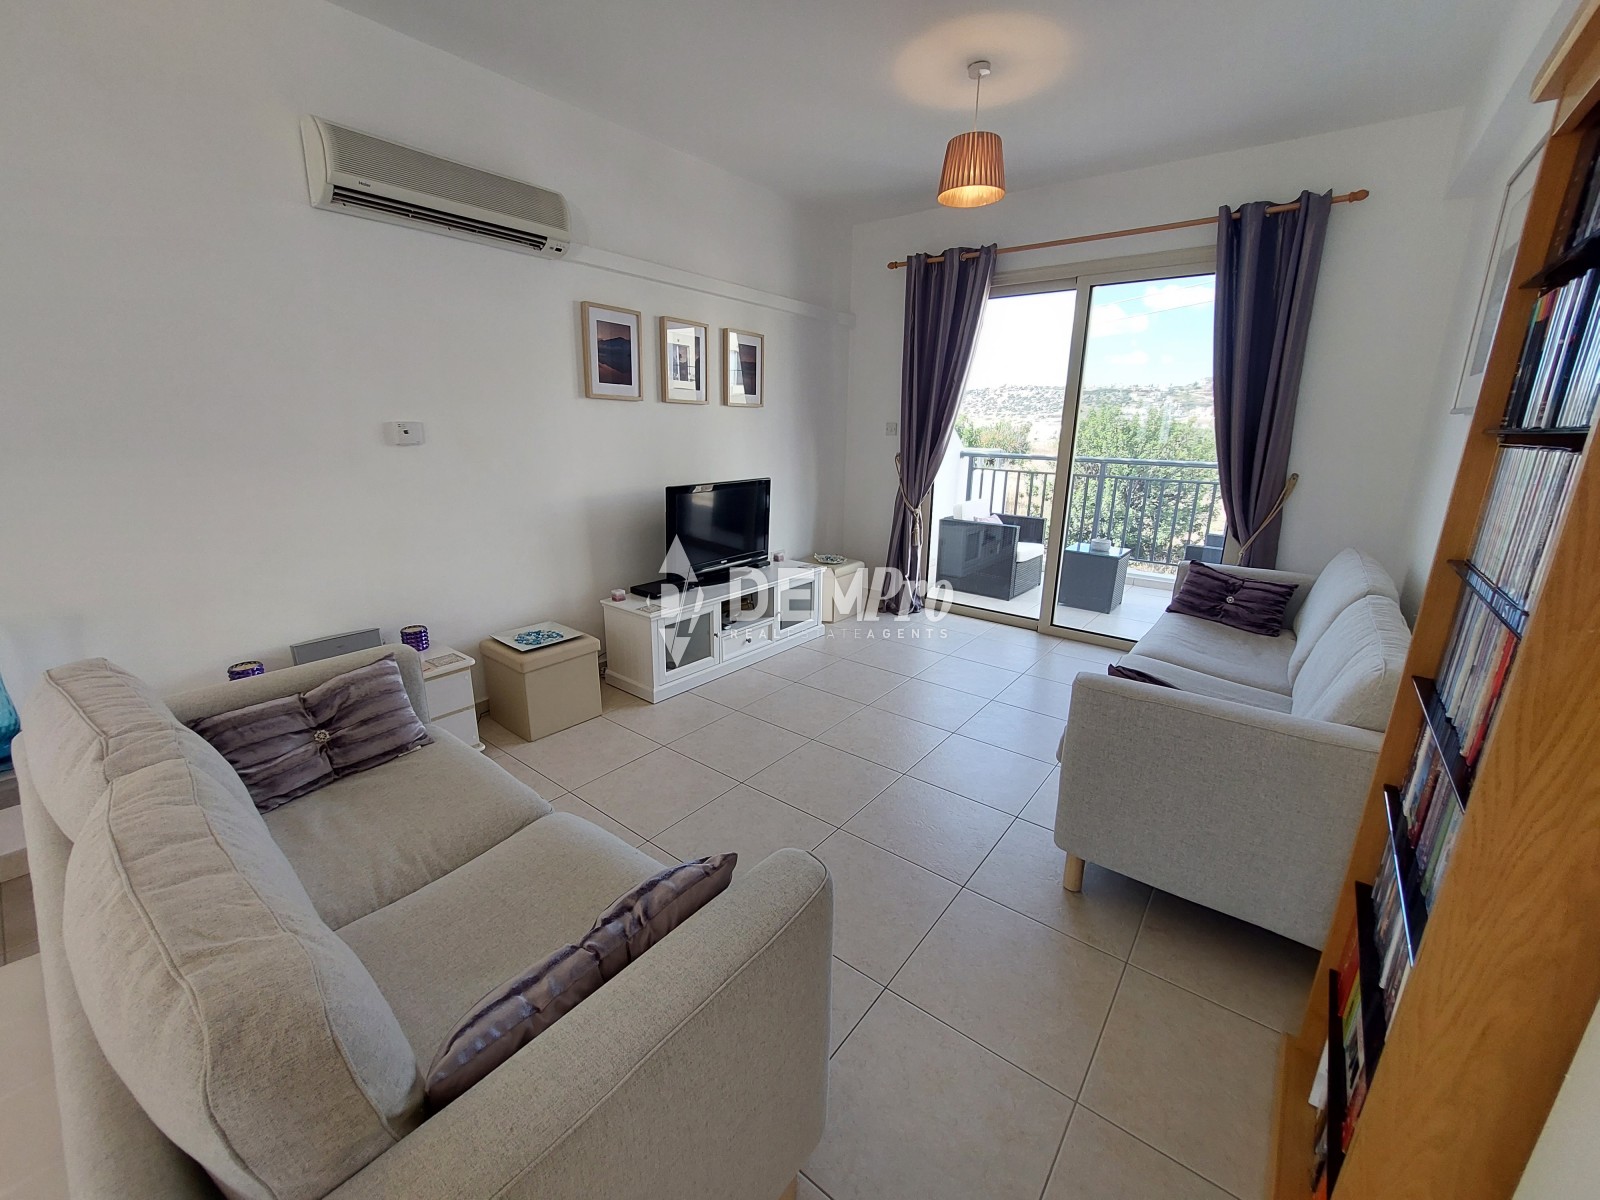 Apartment For Sale in Peyia, Paphos - DP4008